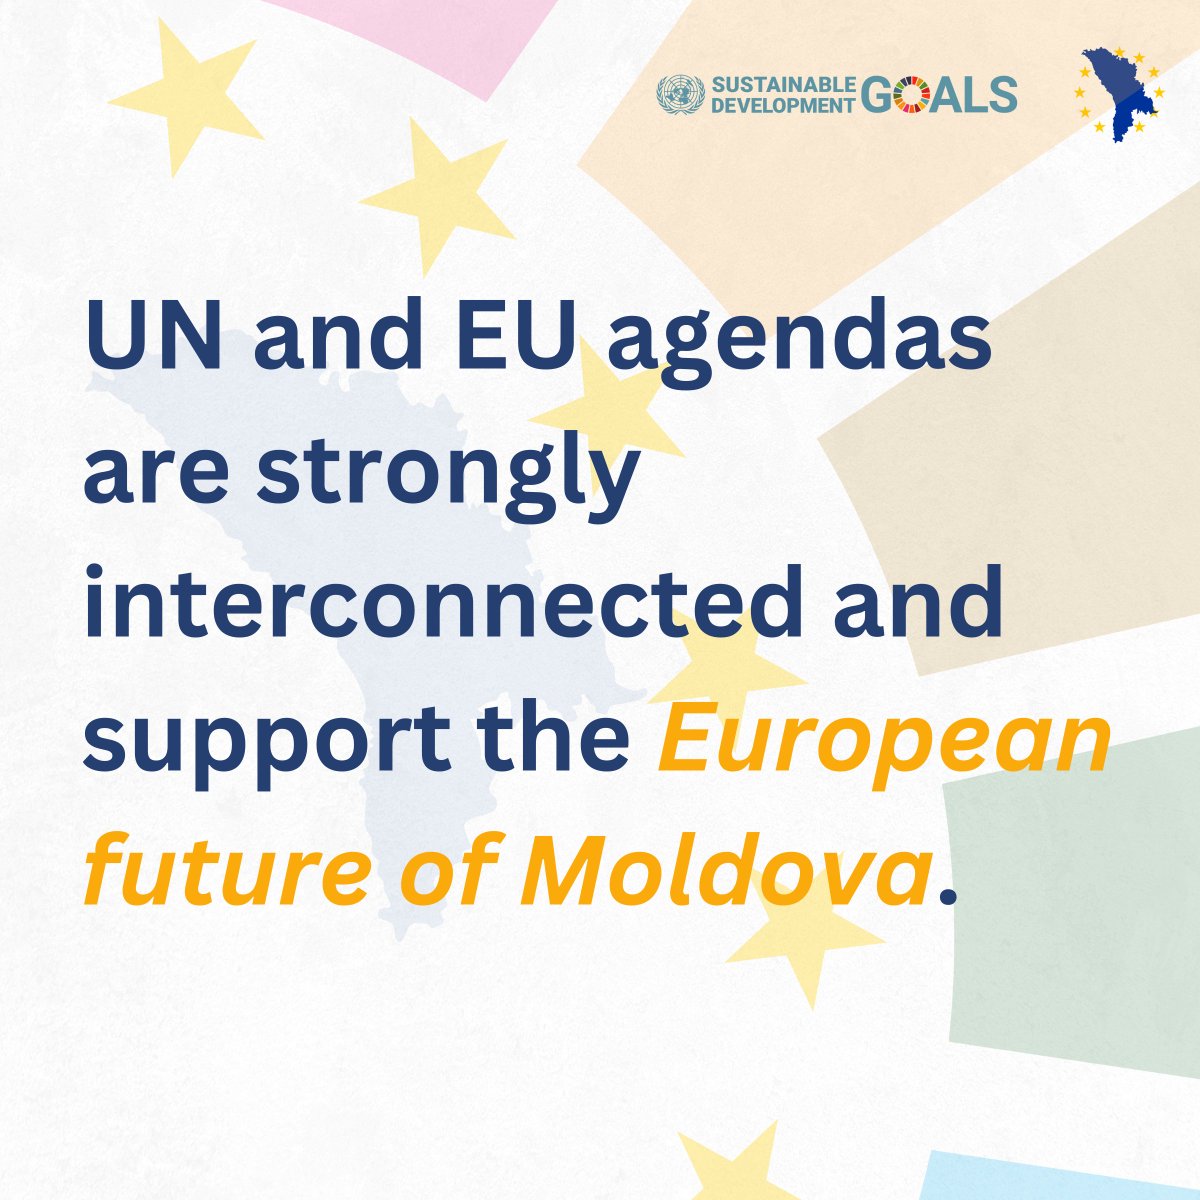 76% of the #SDGs targets are connected to individual EU accession negotiation chapters as shown by the most recent report on synergies between the EU accession process and #SDGs in Moldova developed jointly by #UNMoldova, @GuvernulRMD and @EUinMoldova bit.ly/3wmCG8L